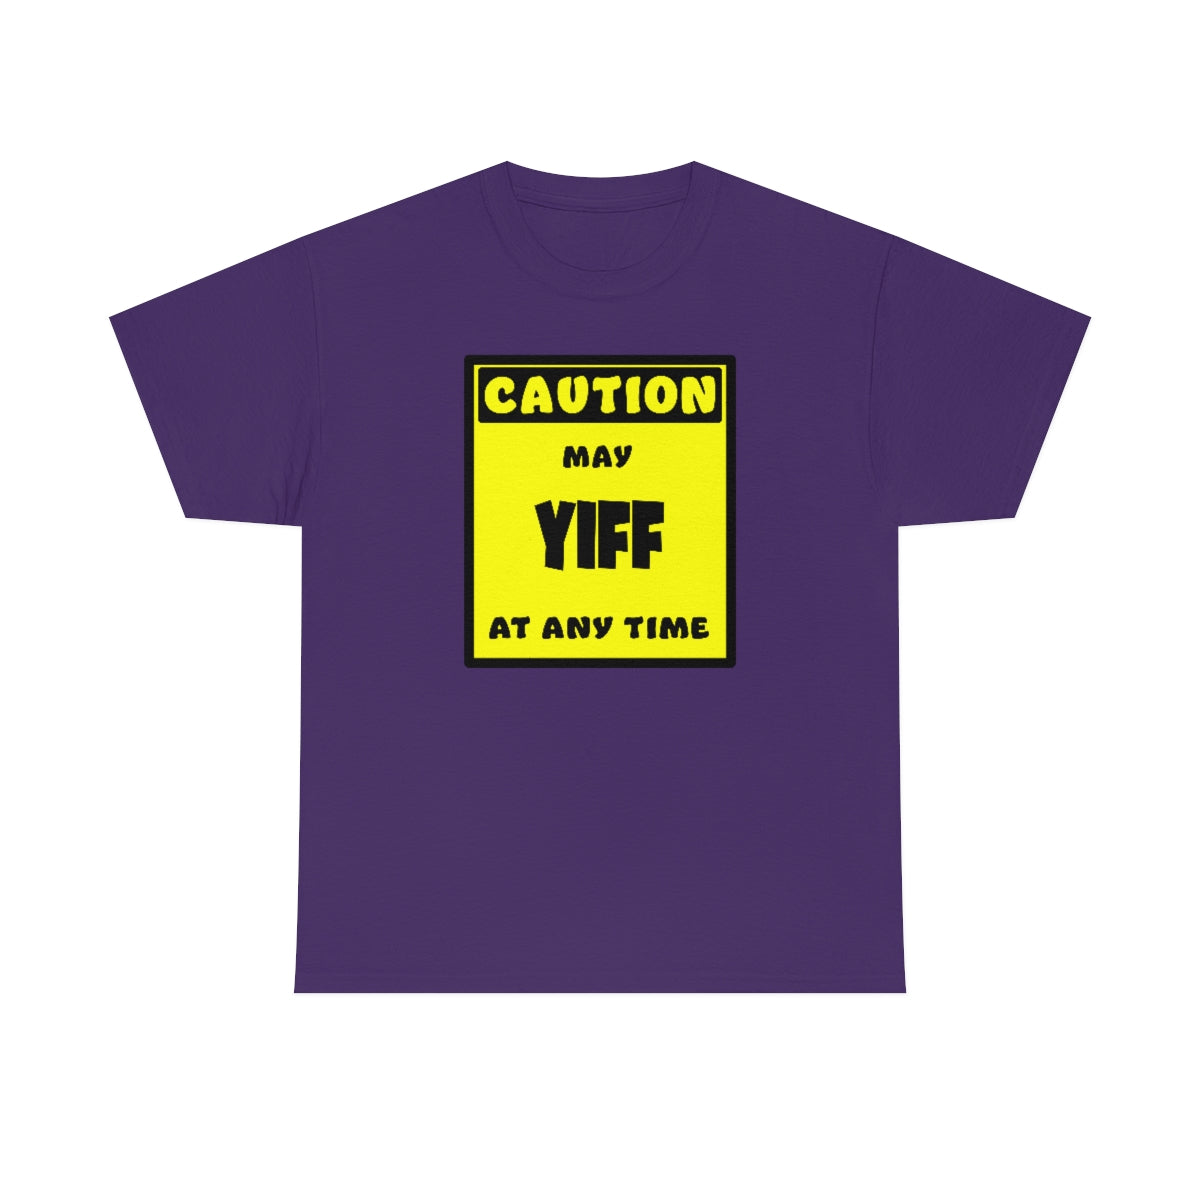 CAUTION! May YIFF at any time! - T-Shirt T-Shirt AFLT-Whootorca Purple S 